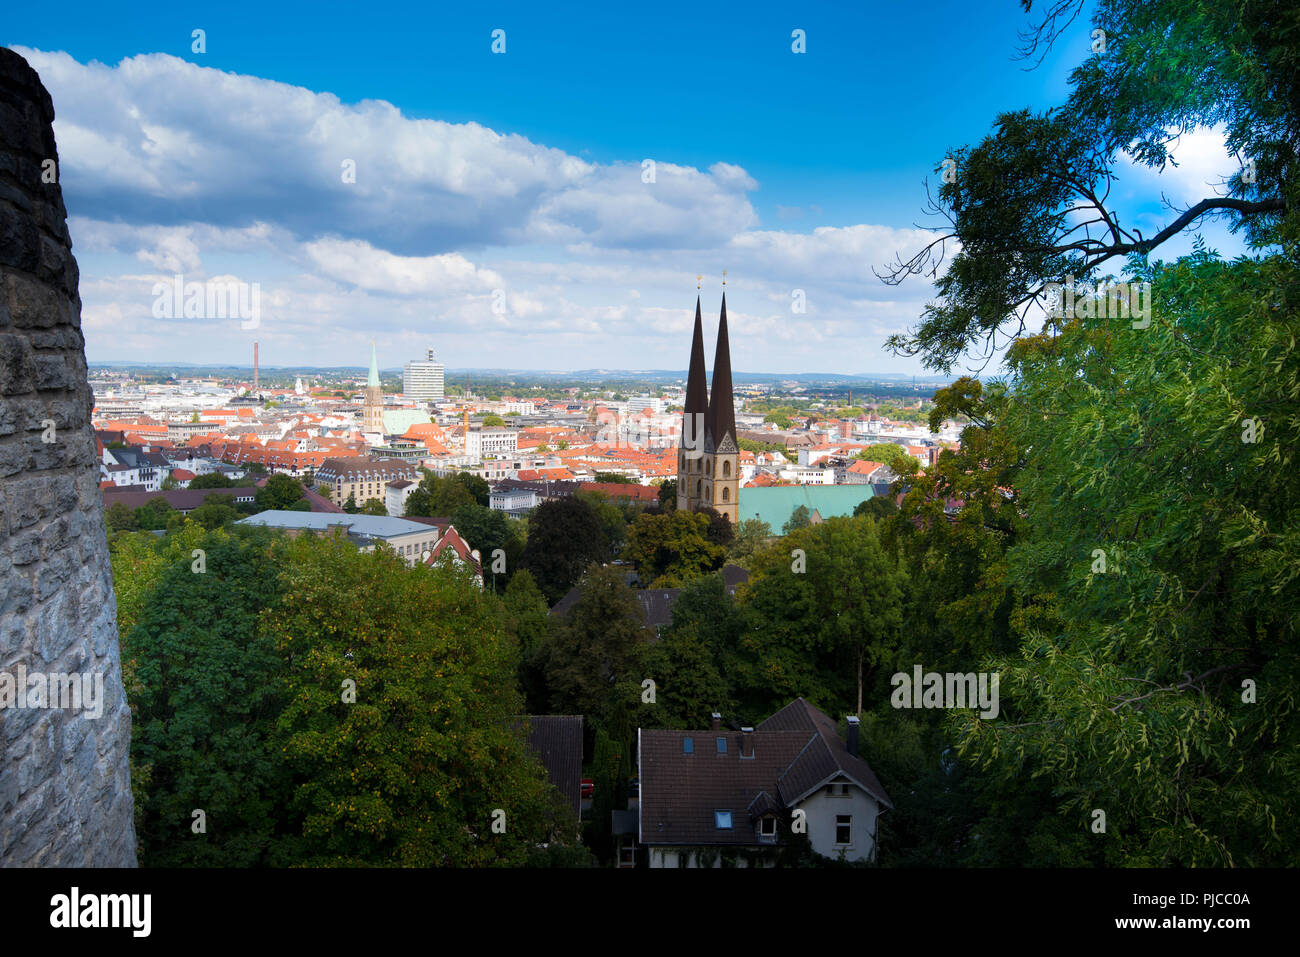 View to the city of Bielefeld in Germany from its castle Stock Photo